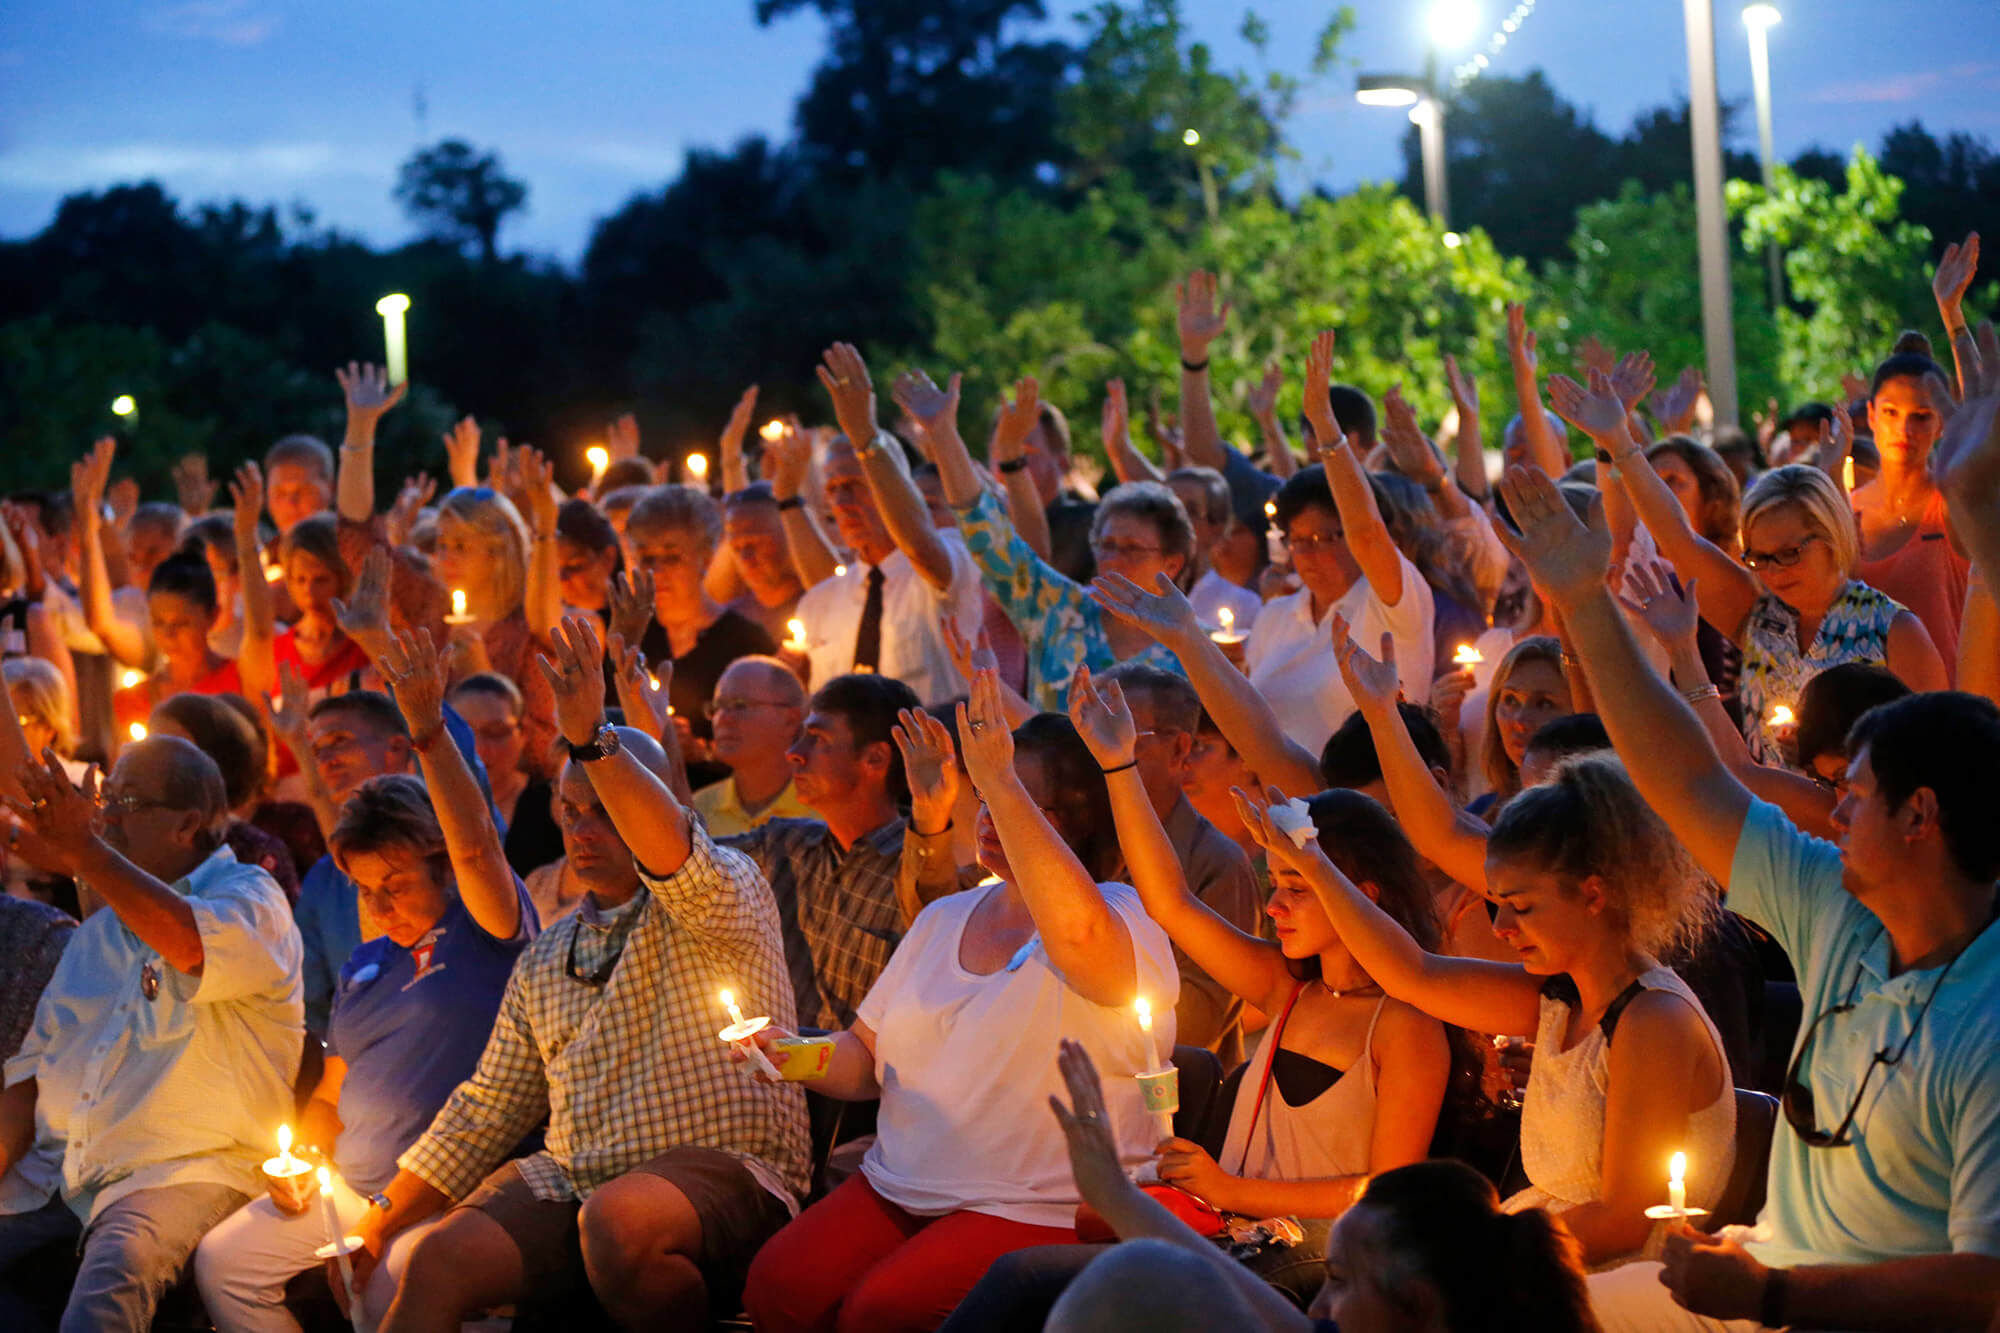 Image of candlelight vigil in Baton Rouge for the killed police officers